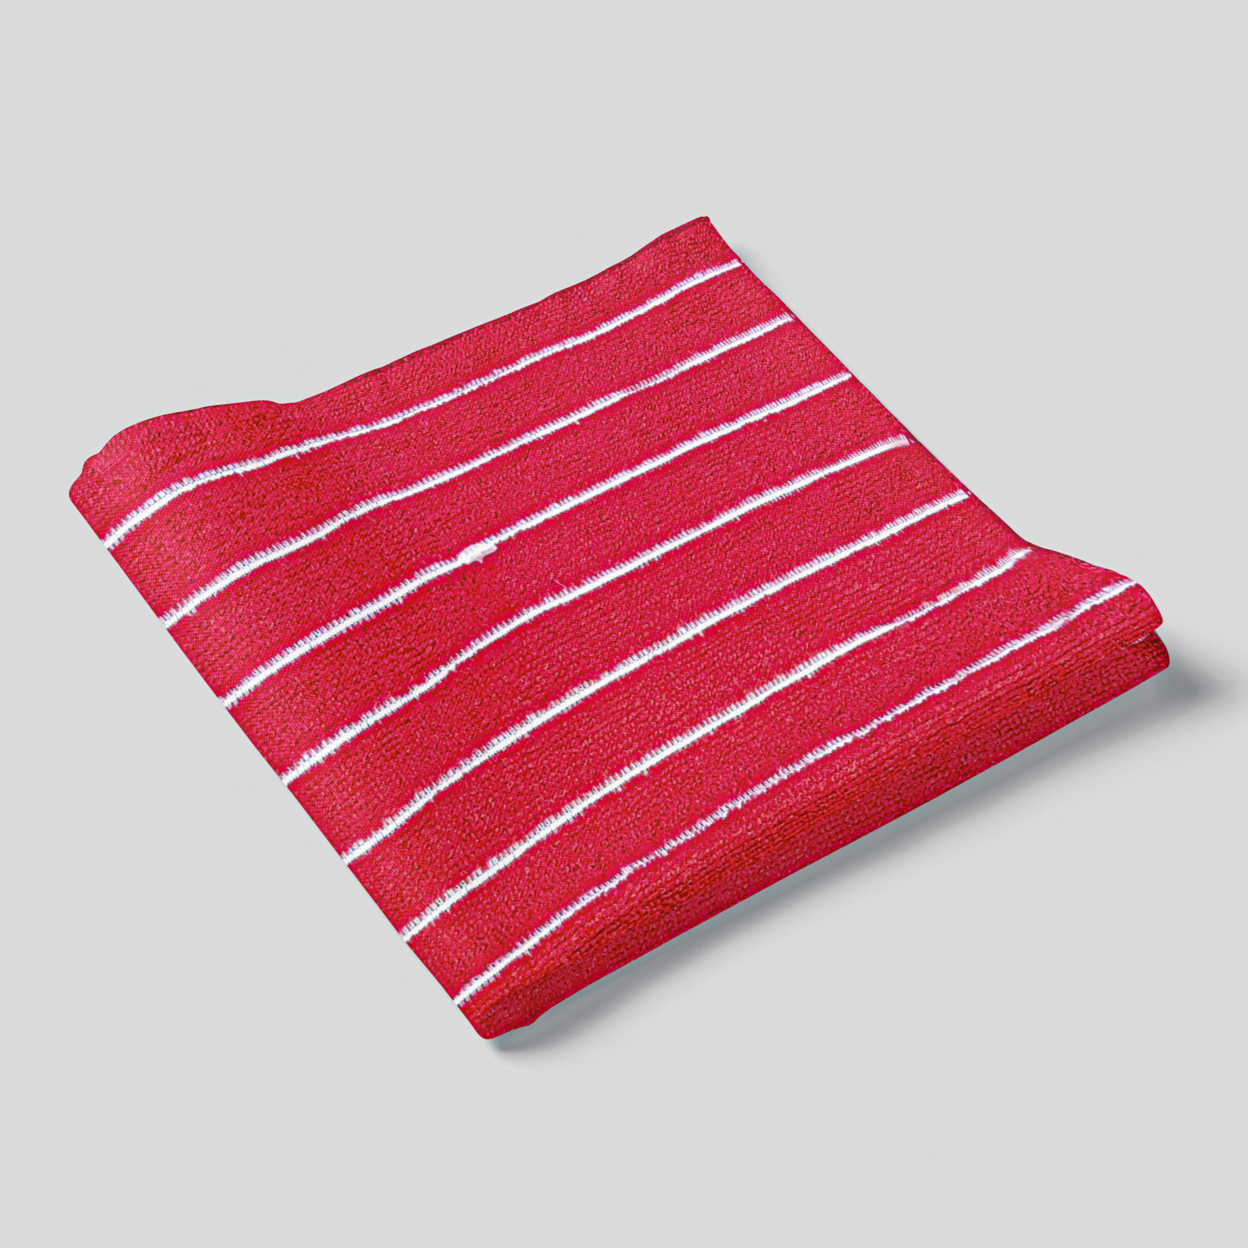 Multi-Pack Striped Super Soft And Absorbent Microfiber Dish Cloths - 12-Pack